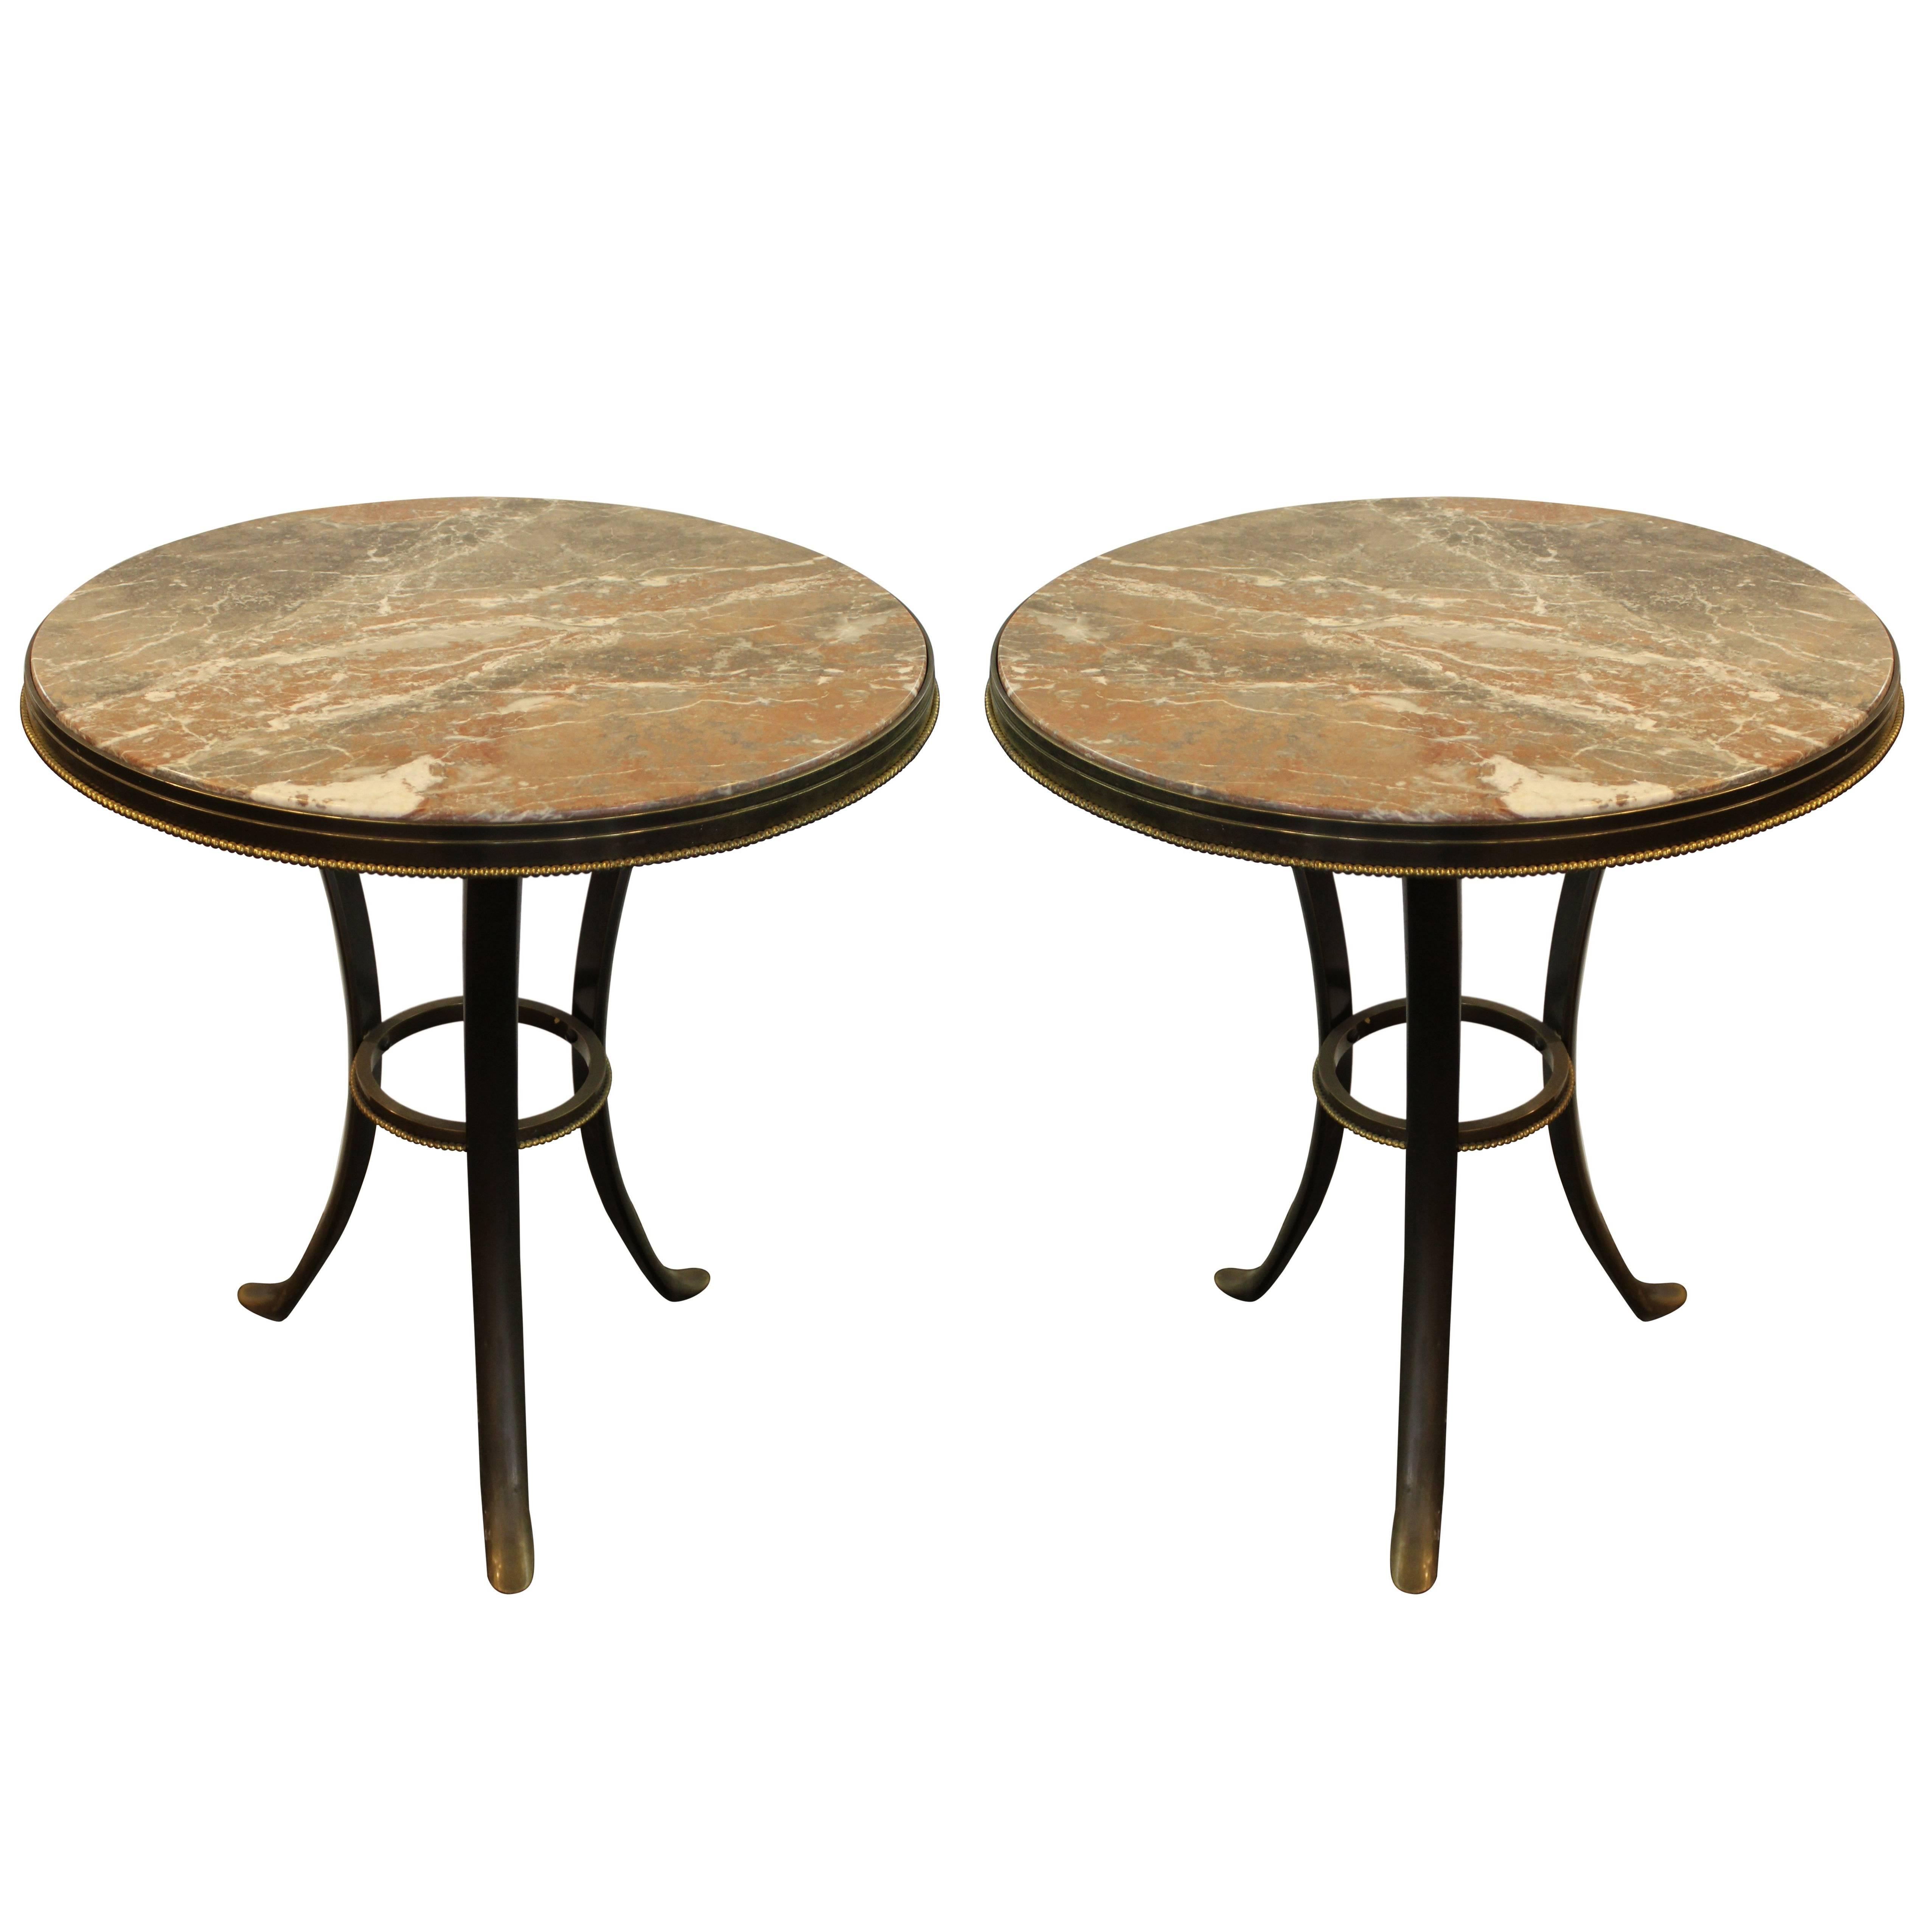 Midcentury Gueridon Tables in Patinated Bronze with Marble Top